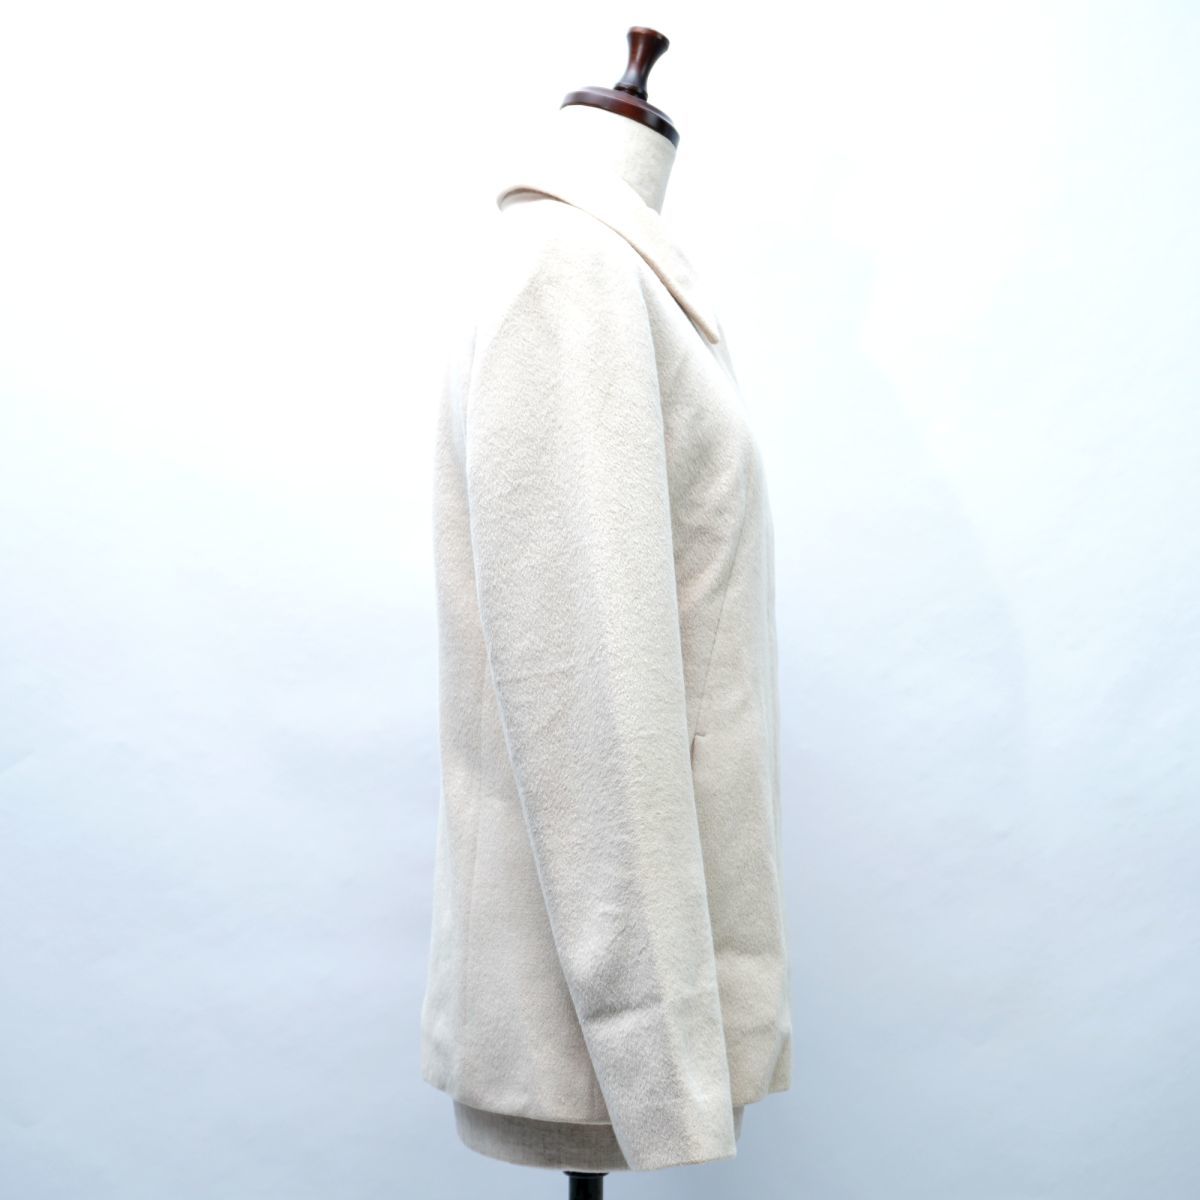 INED Ined Anne gola. wool coat turn-down collar ivory size 2*GC1363